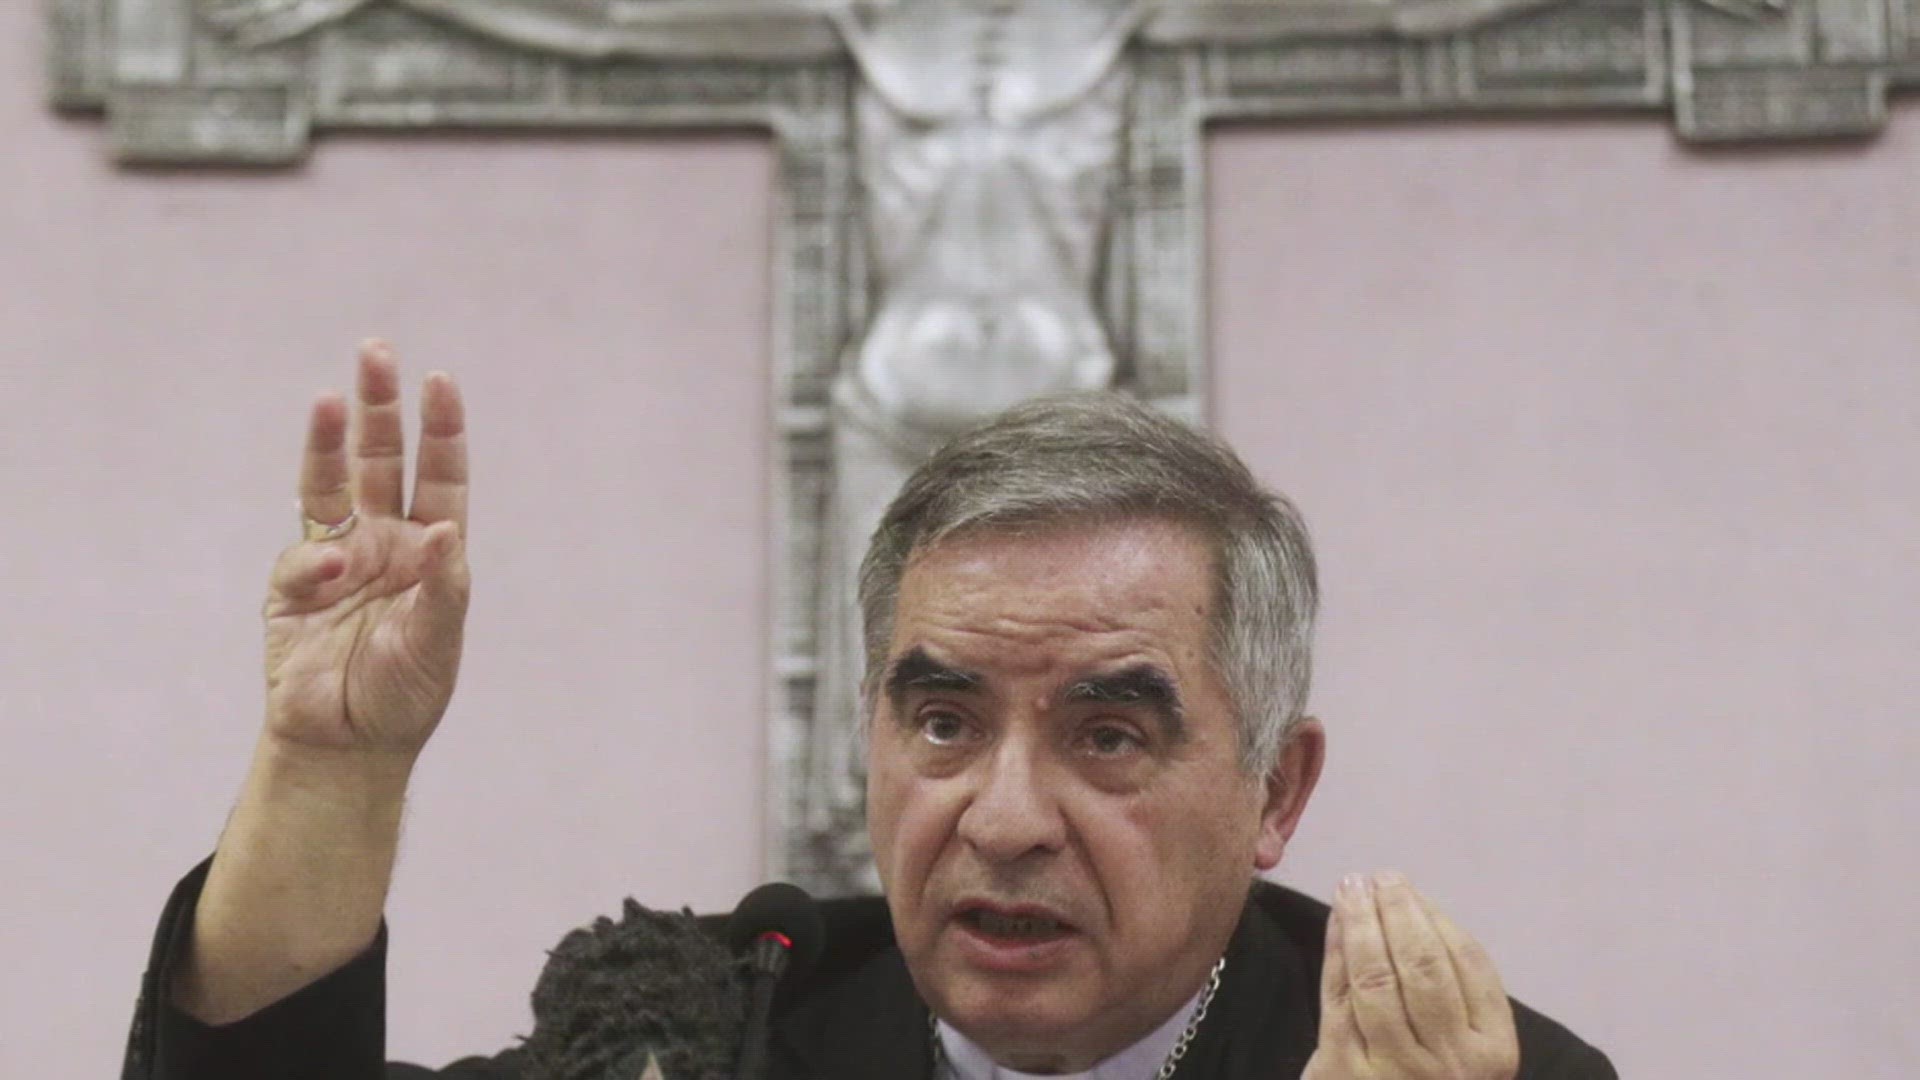 Cardinal Angelo Becciu, the first cardinal ever prosecuted by the Vatican criminal court, was absolved of several other charges.